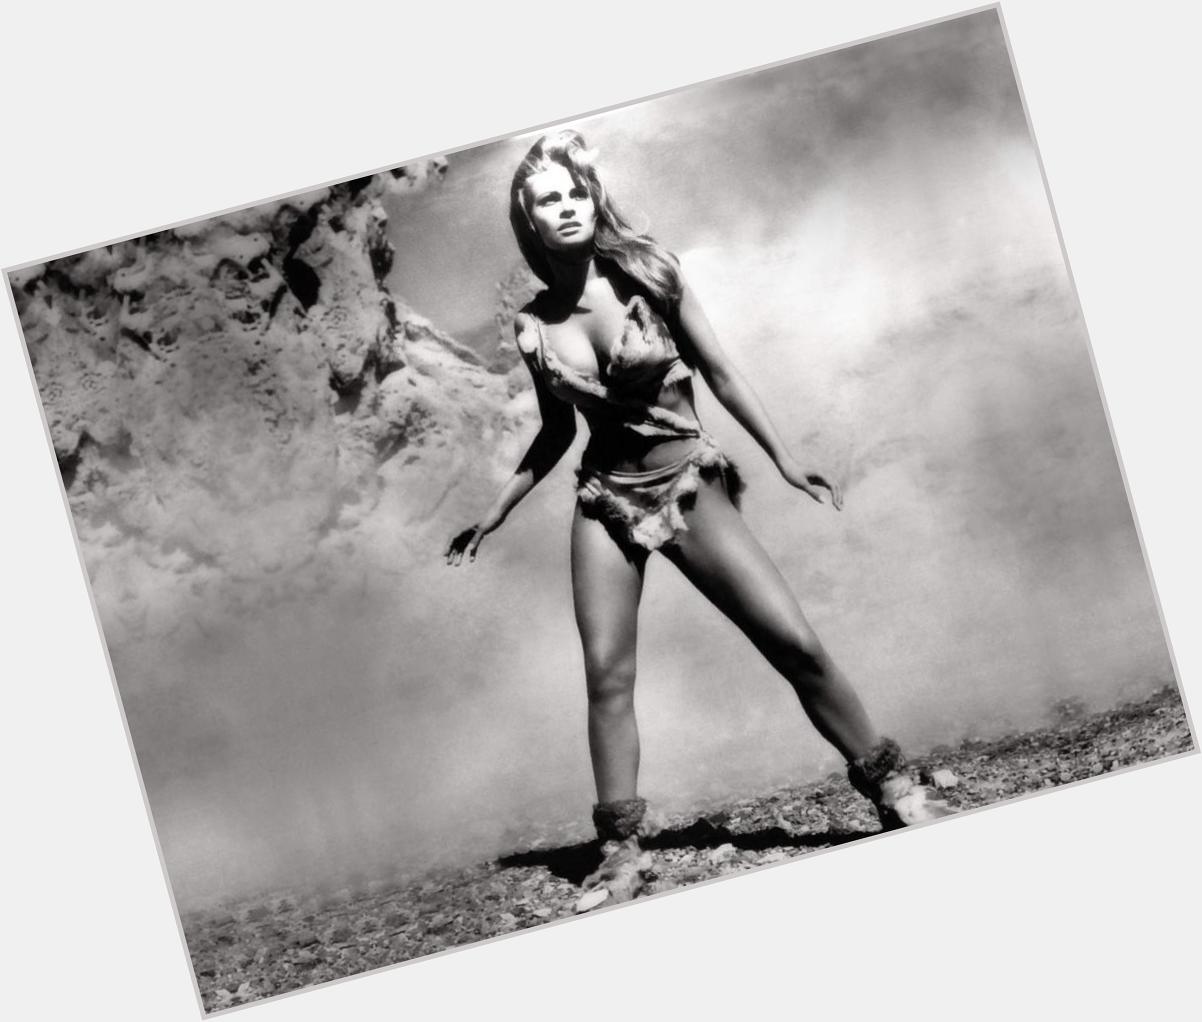 This shot in 1966\s ONE MILLION YEARS B.C. made Raquel Welch a star. Today, we wish her a very happy 75th birthday! 